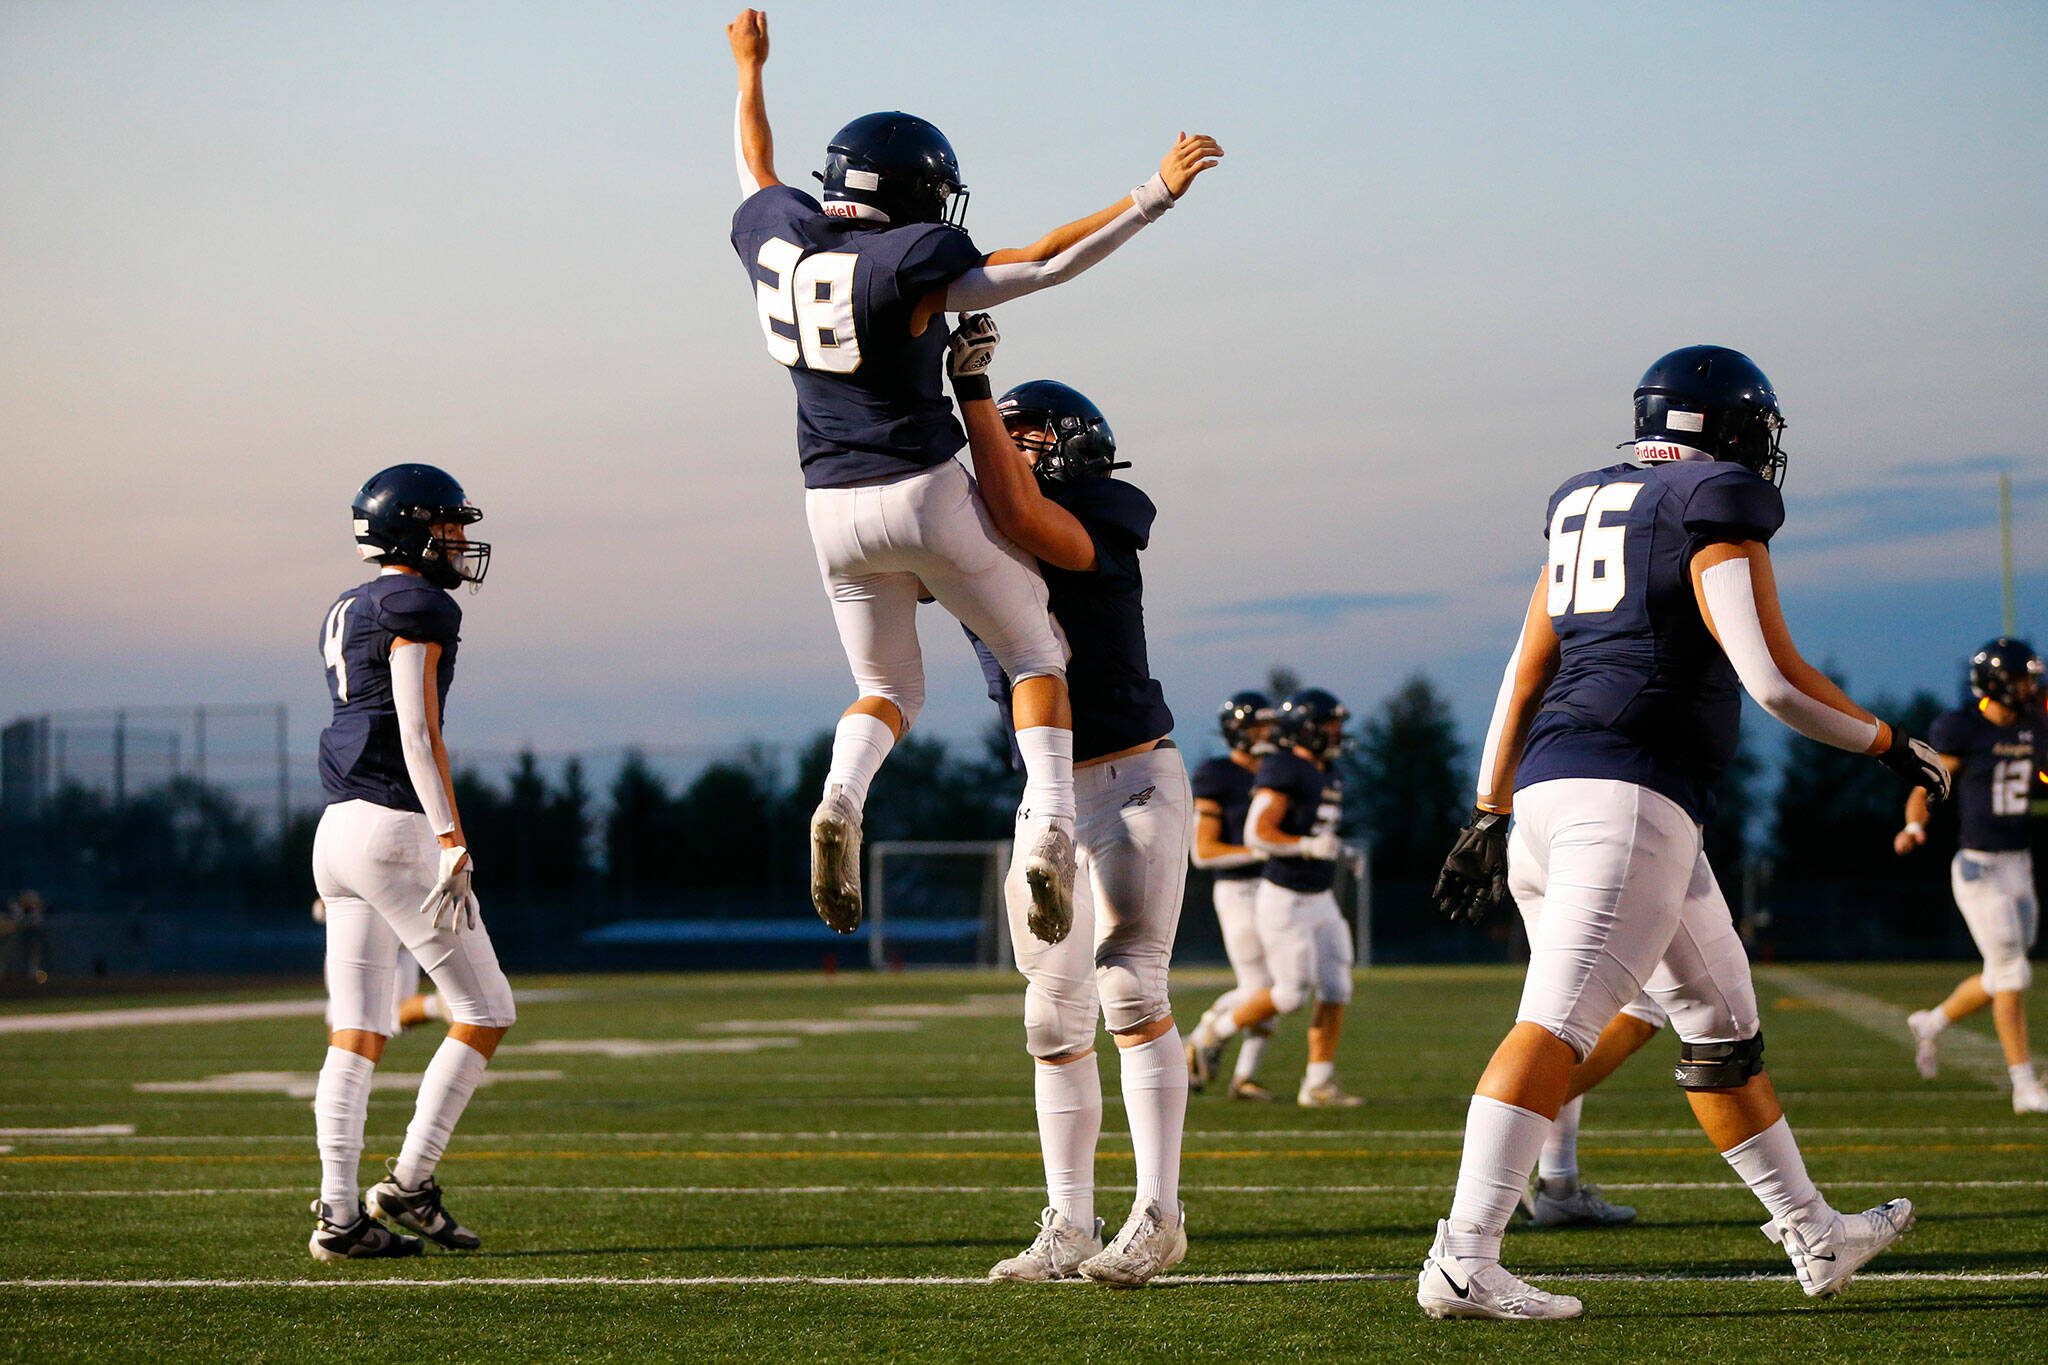 Arlington’s Caleb Reed is thrown into the air by lineman Dylan Scott after scoring a touchdown against Ferndale on Friday, Sept. 22, 2023, at Arlington High School in Arlington, Washington. (Ryan Berry / The Herald)